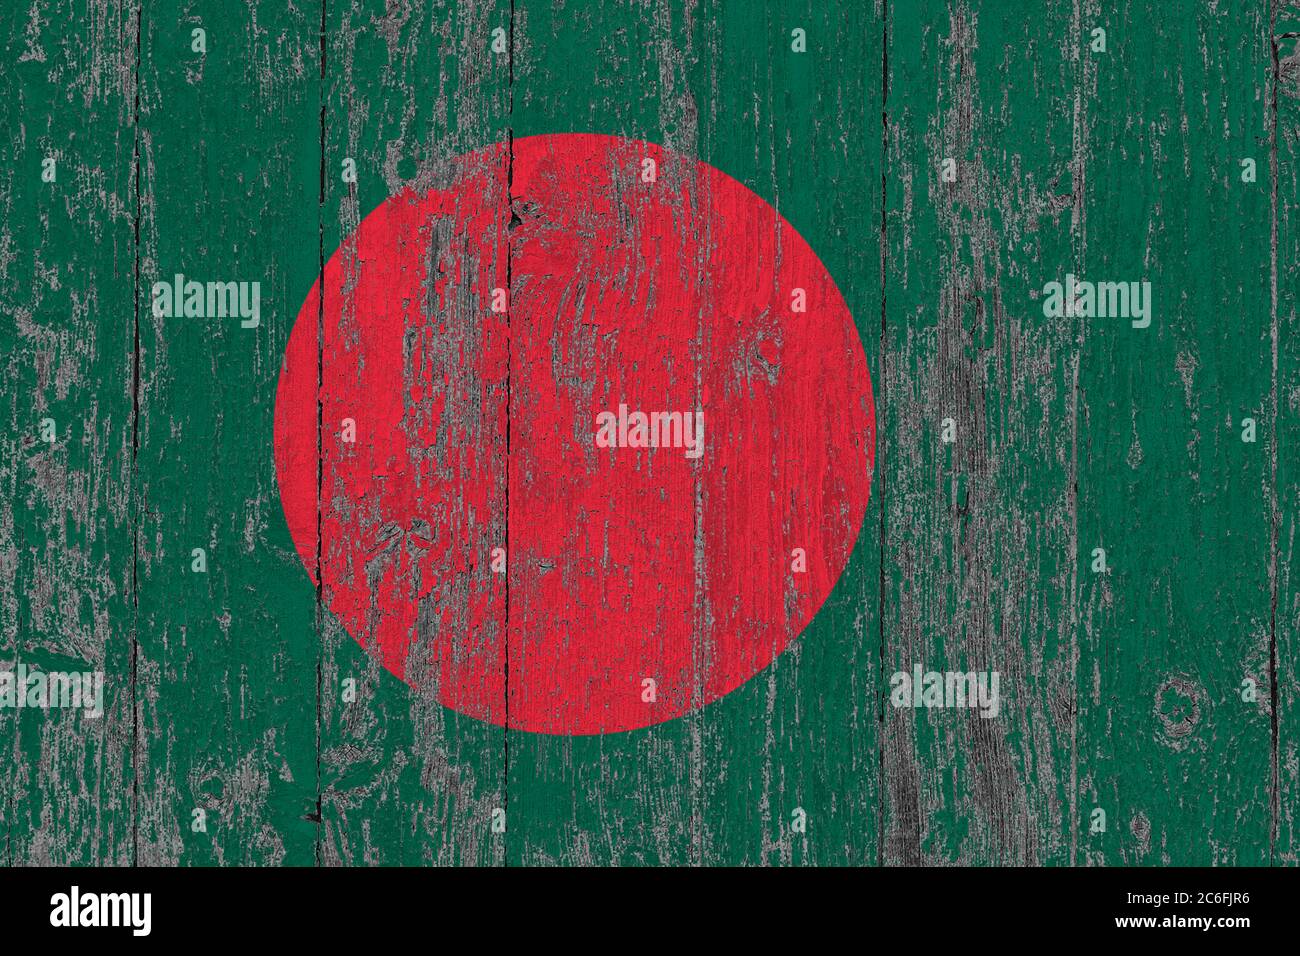 Bangladesh flag on grunge scratched wooden surface. National vintage background. Old wooden table scratched flag surface. Stock Photo